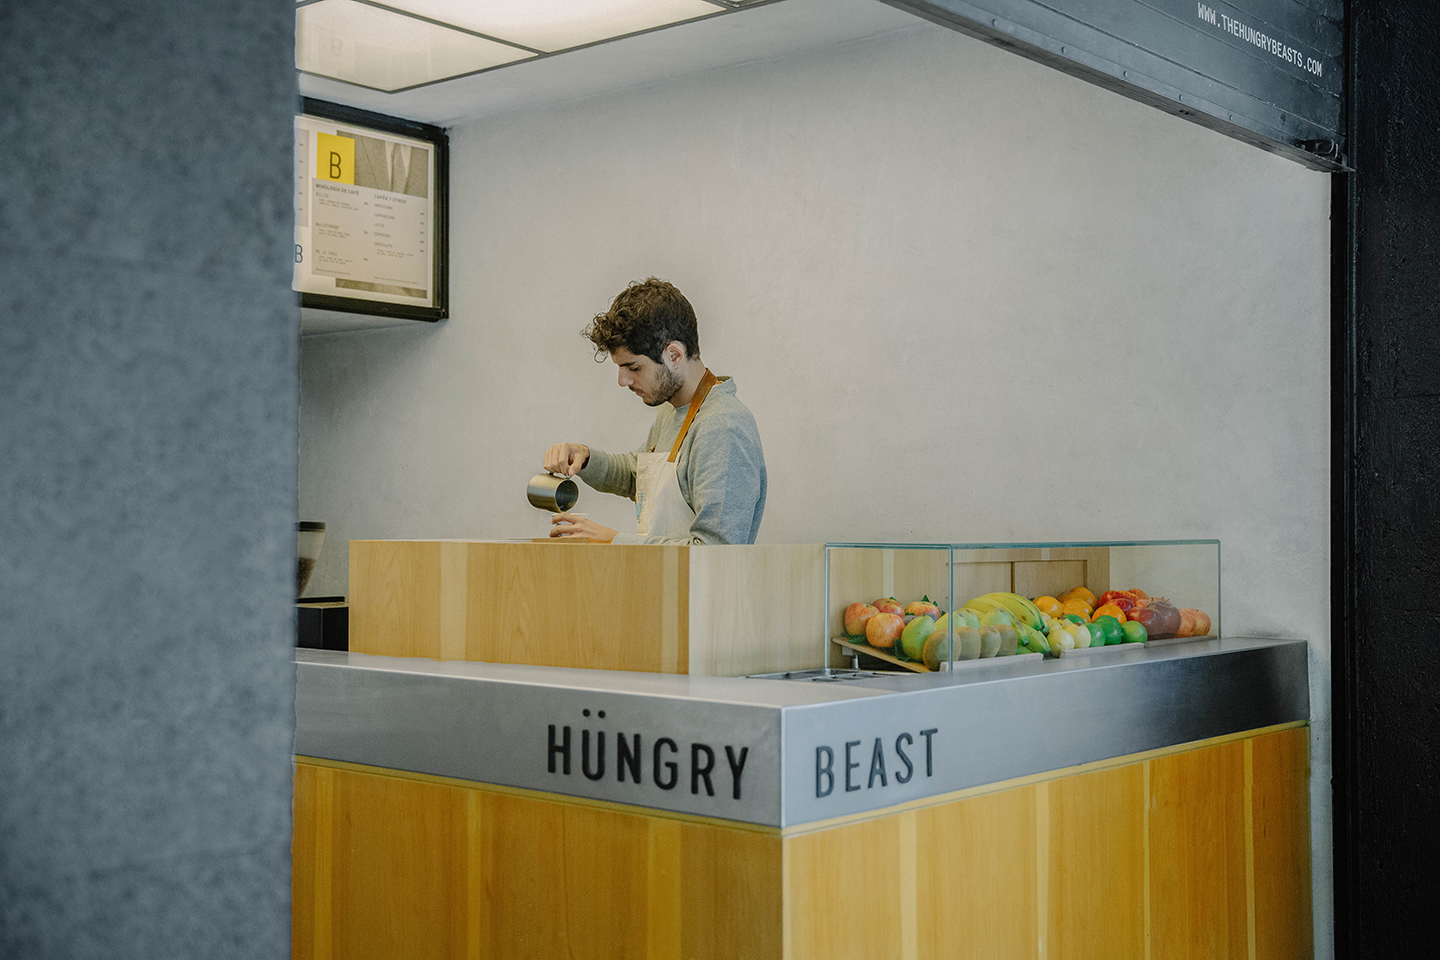 Graphic identity and interior design by Savvy for Mexican cafe and juice bar Hüngry Beast